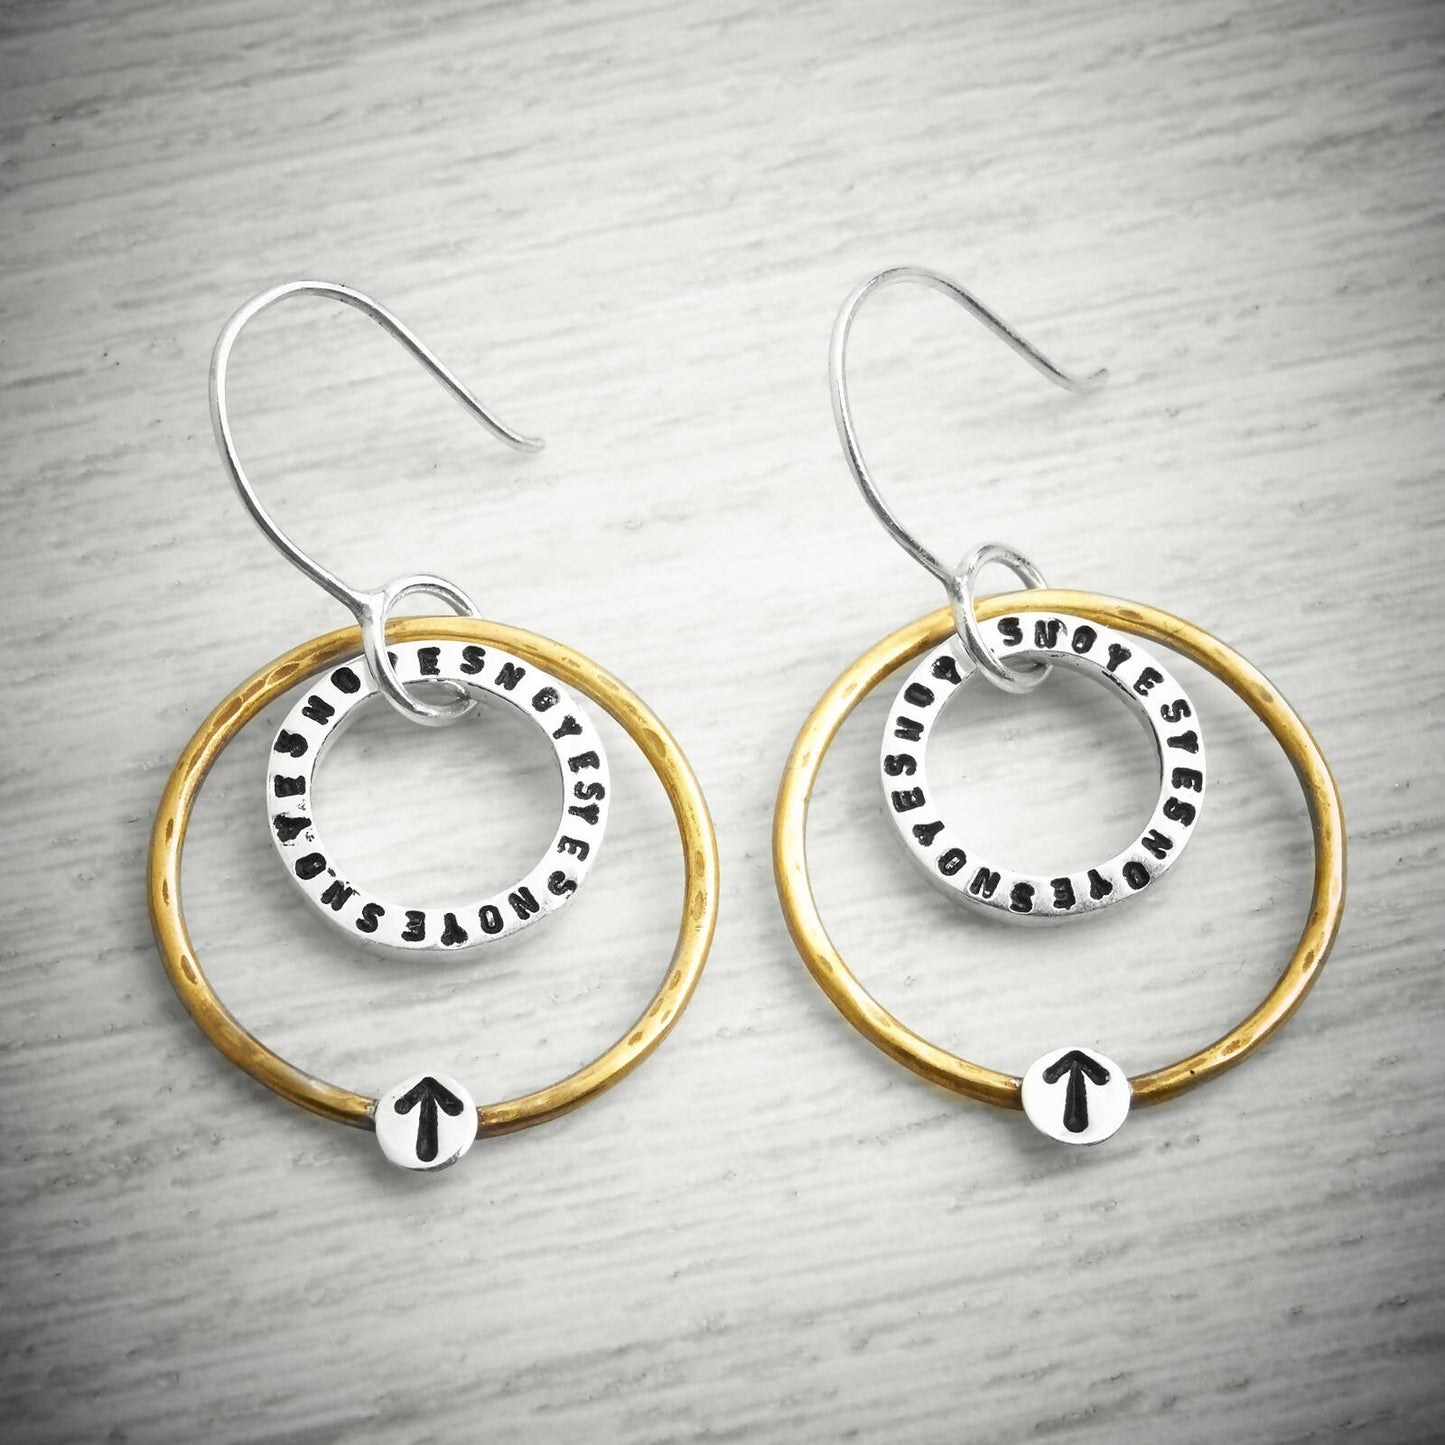 The YES/NO Spinning Hook Earrings by Emma White